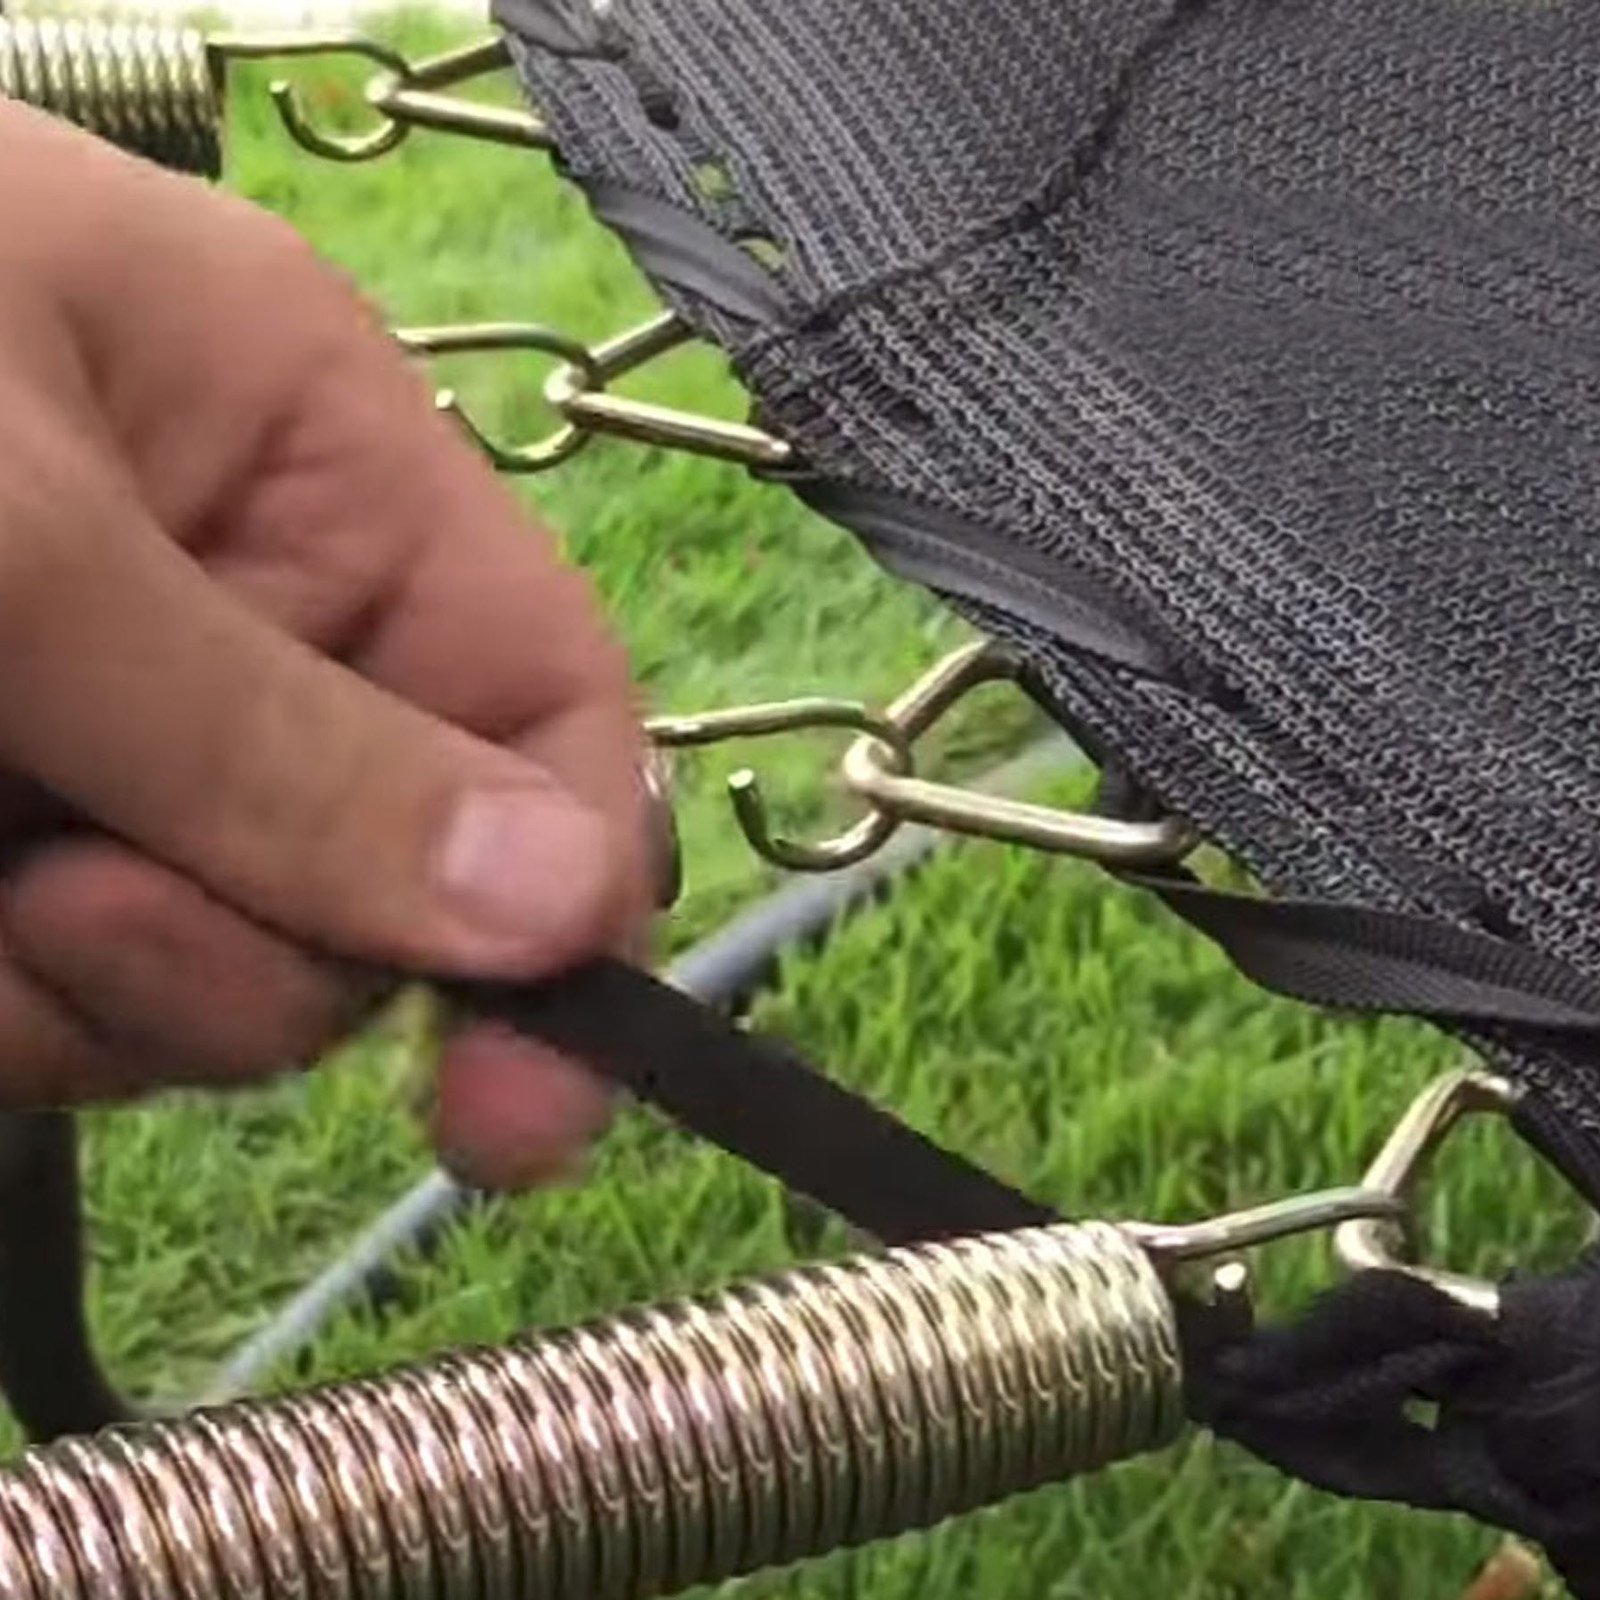 SkyBound 15-Foot Trampoline Net - Fits 5 Poles using a Top Ring - image 5 of 8